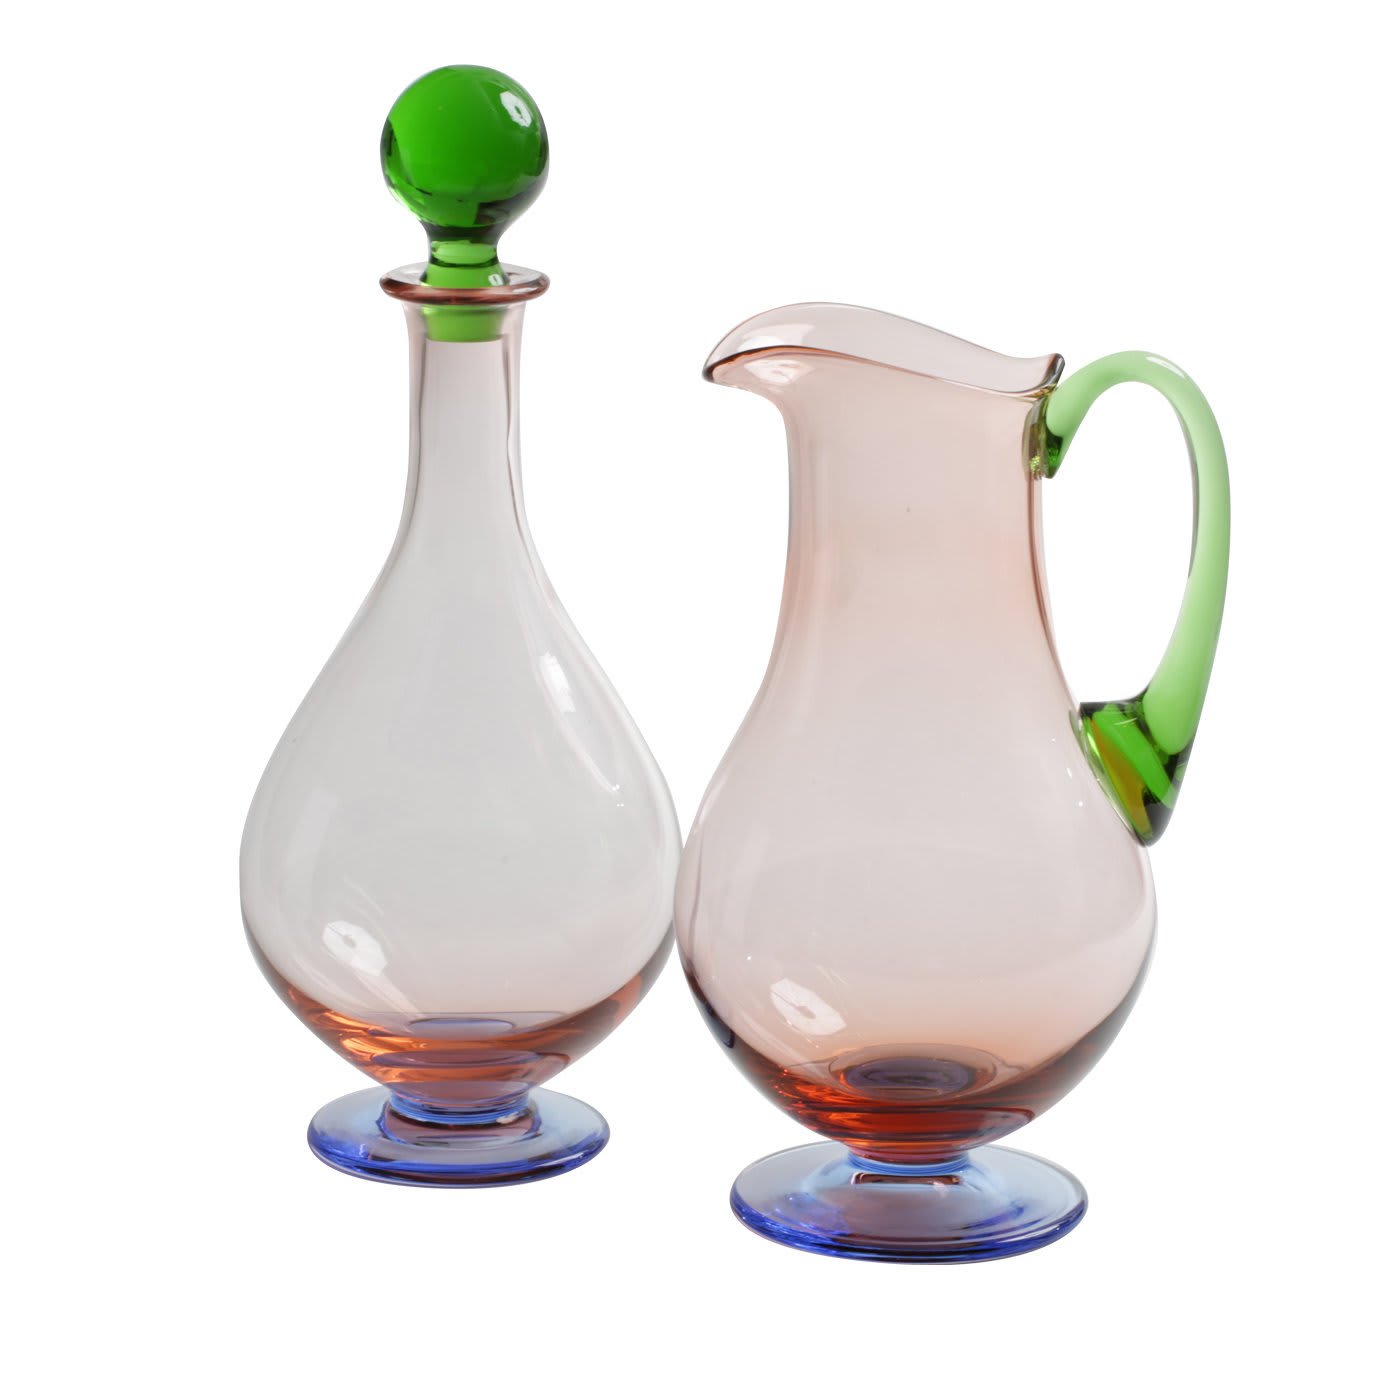 Burano Bottle and Pitcher - Fornace Mian